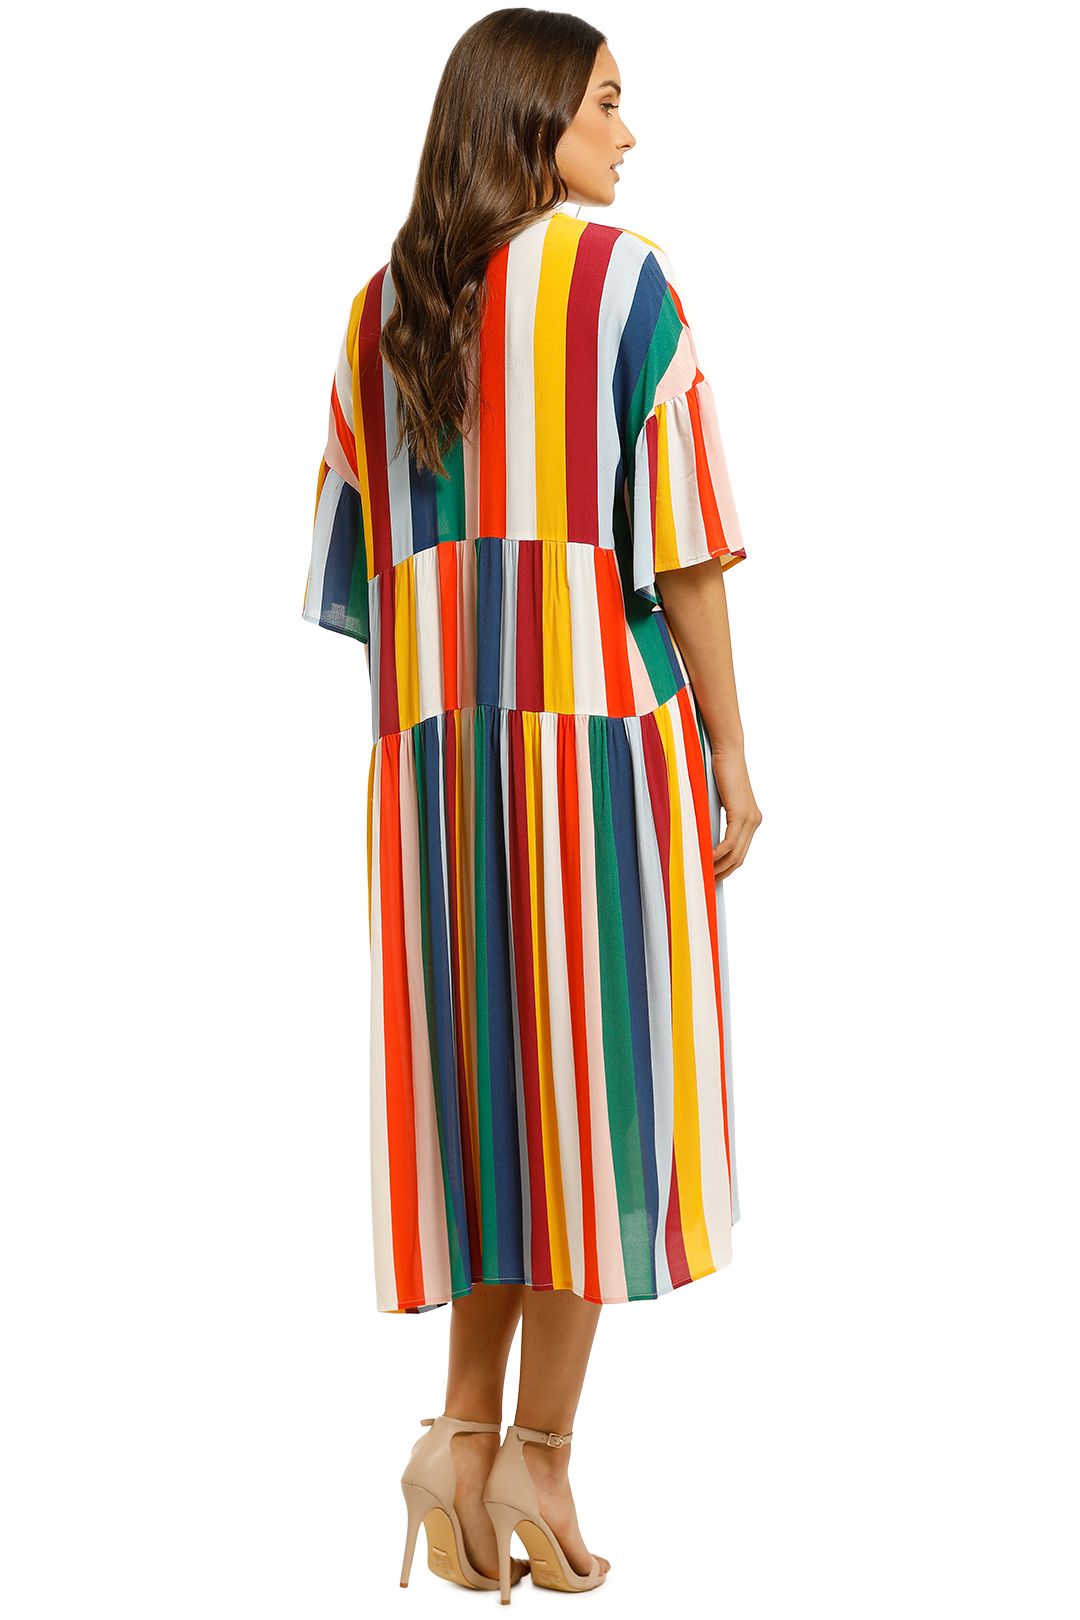 Curate-By-Trelise-Cooper-Vee-You-Dress-Stripe-Back